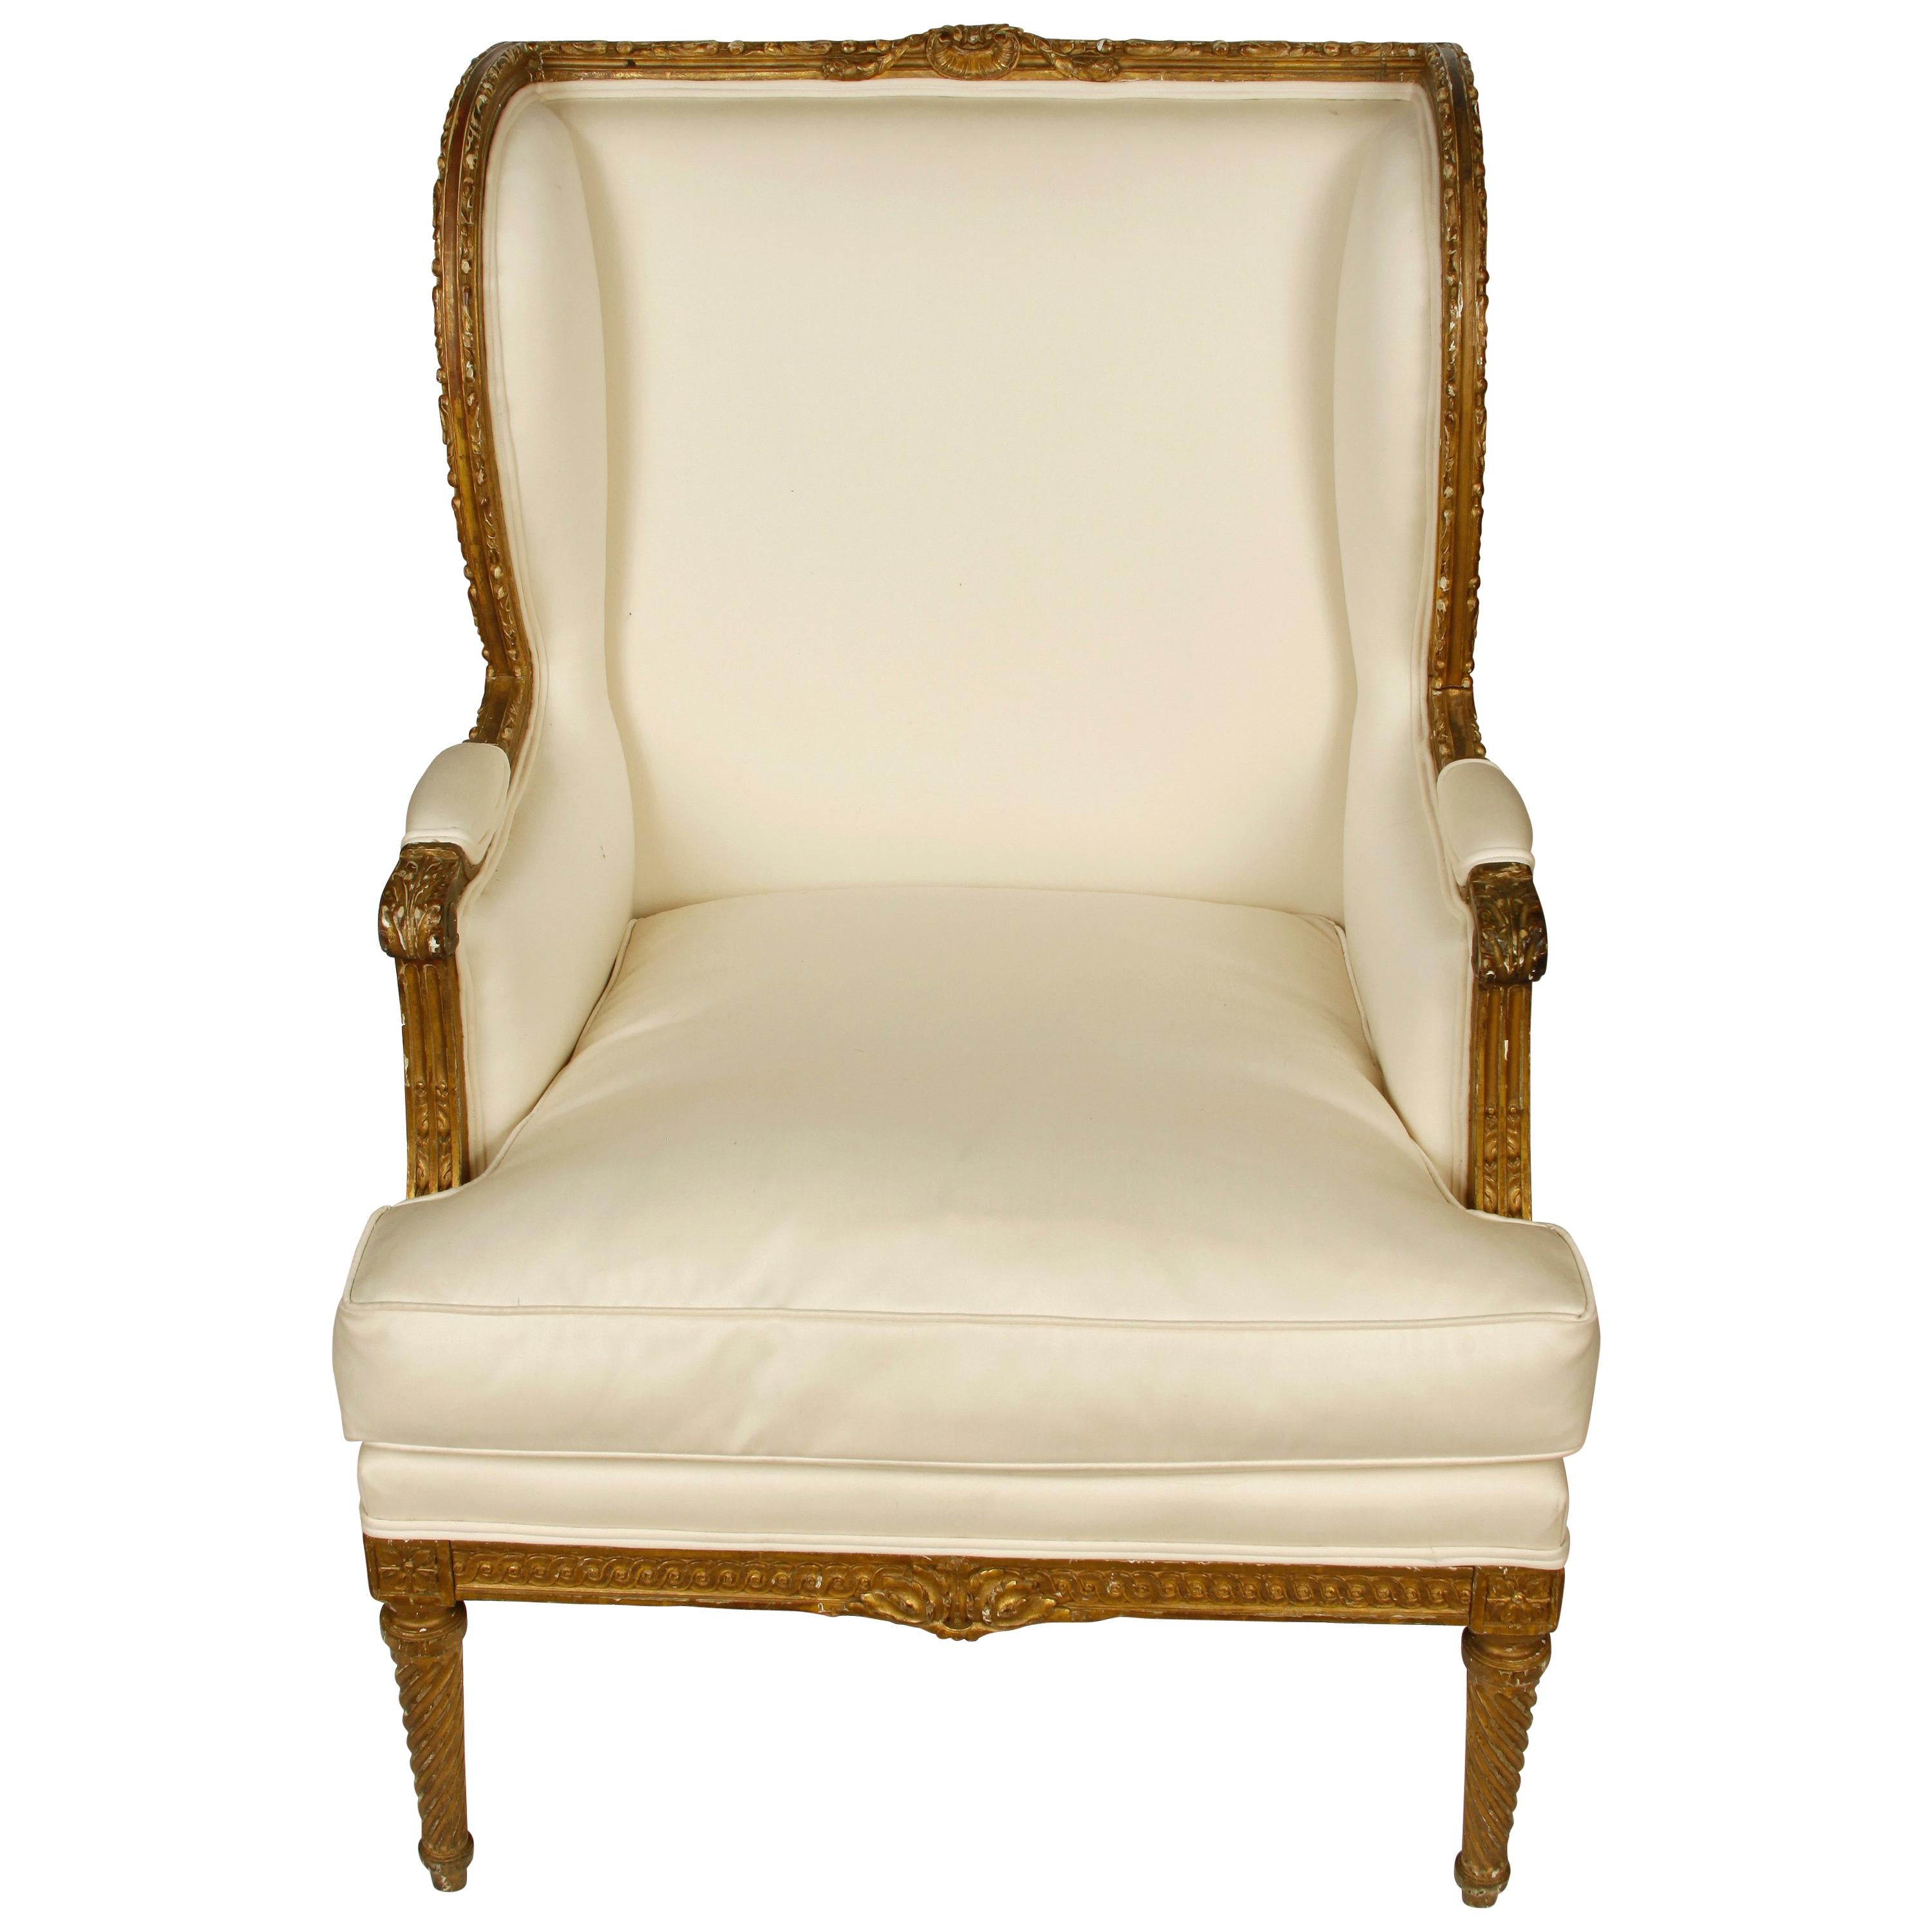 French Style Louis XVI Bergere with Painted Wood Finish and Ivory Upholstery